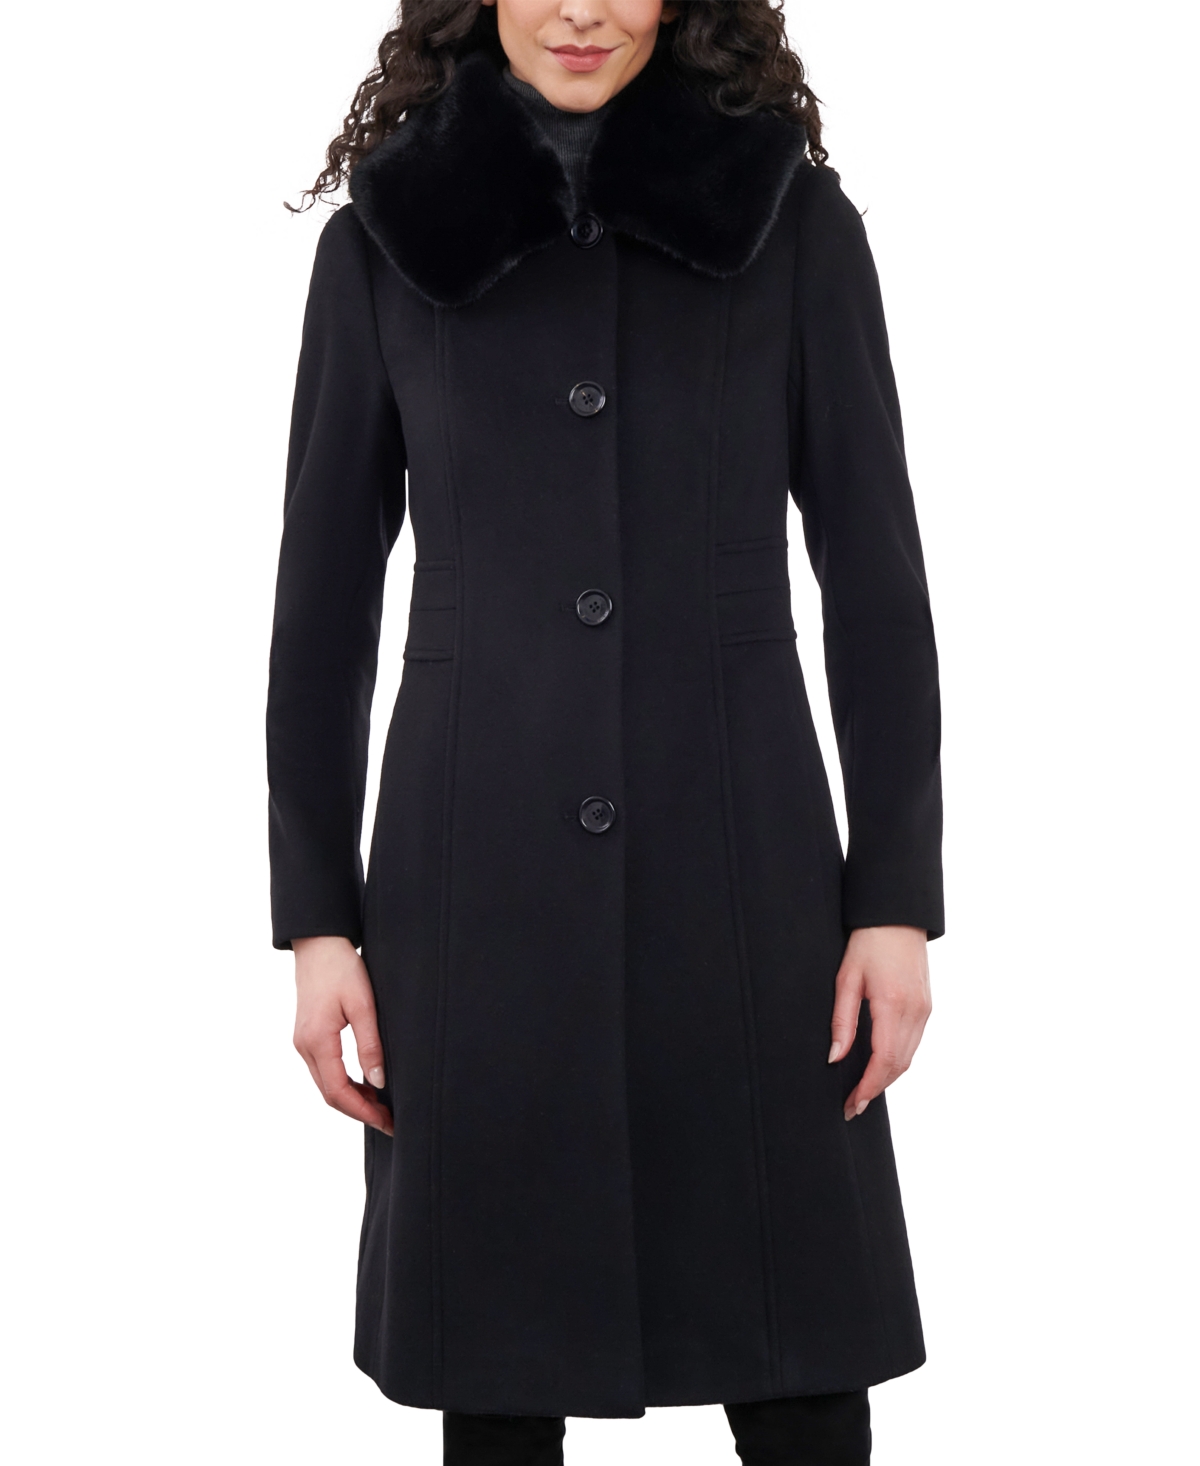 ANNE KLEIN WOMEN'S SINGLE-BREASTED CASHMERE BLEND COAT